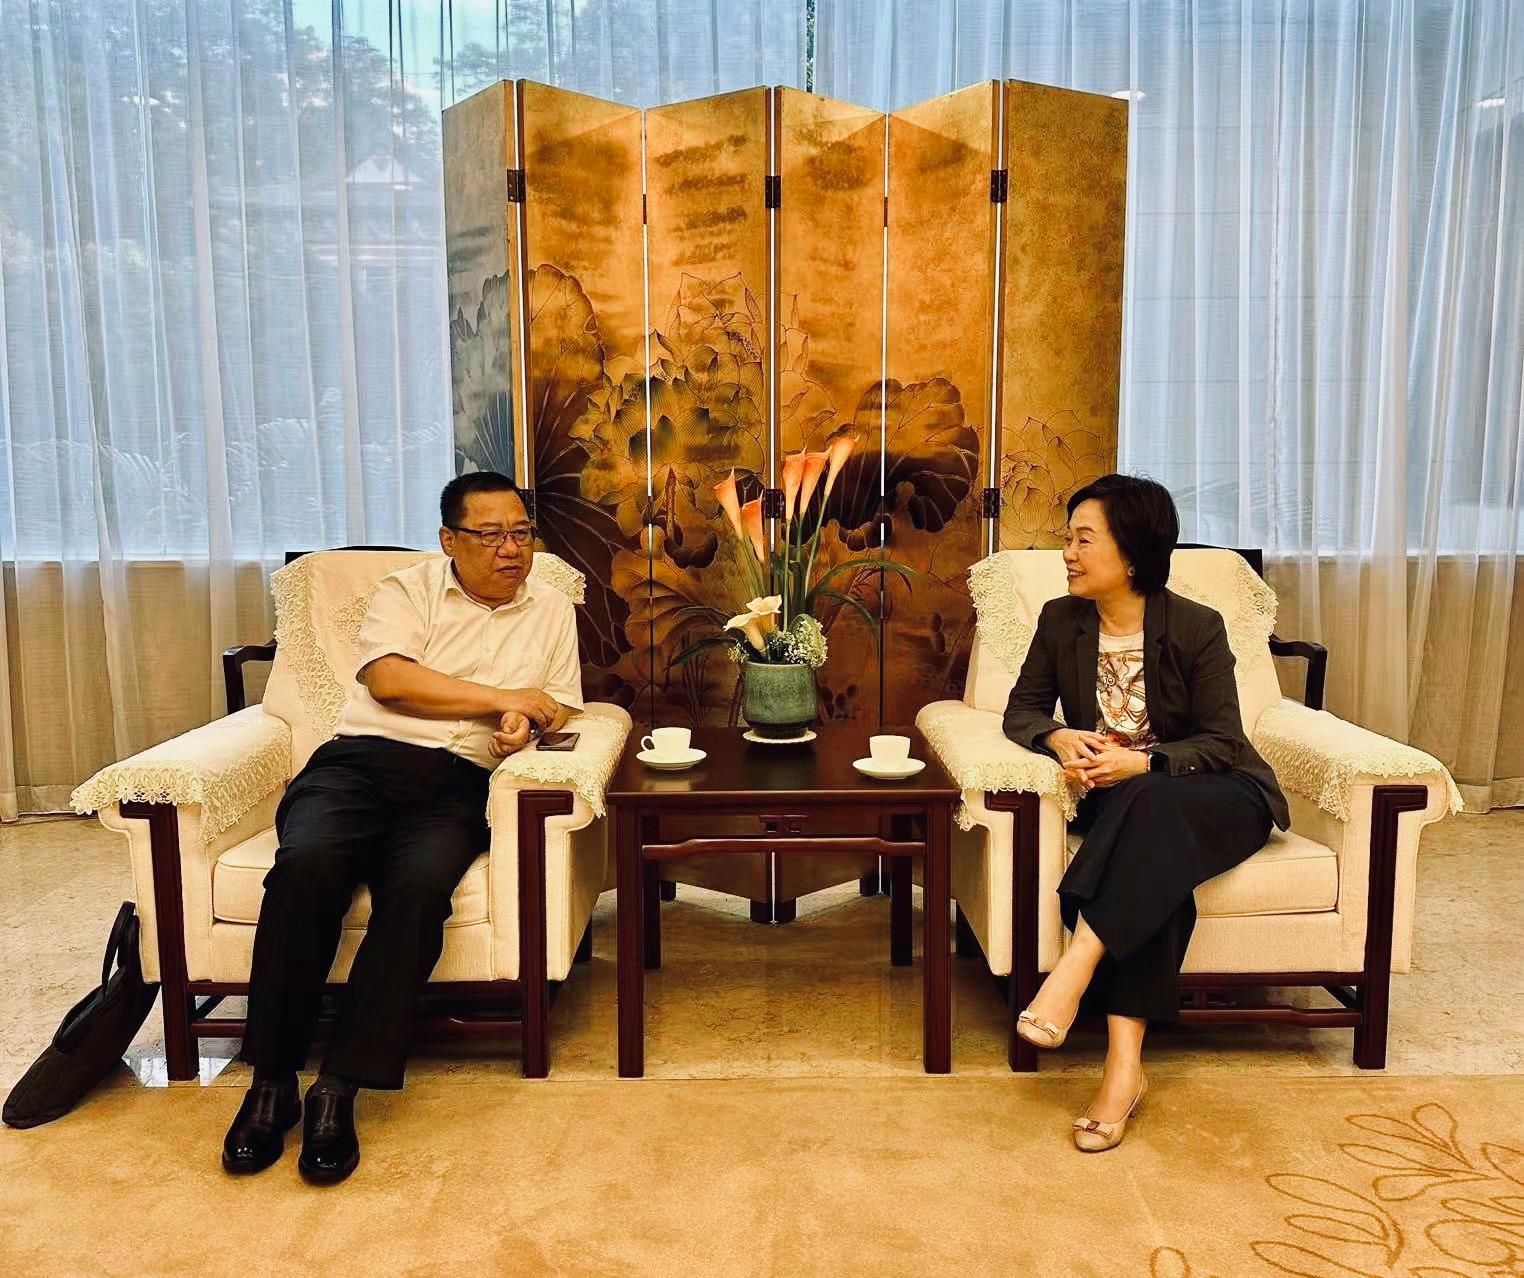 The Secretary for Education, Dr Choi Yuk-lin (right), calls on the Director-General of the Department of Education of Guangdong Province, Mr Zhu Kongjun (left), to exchange ideas on education issues of mutual concern in Guangzhou yesterday (July 21).